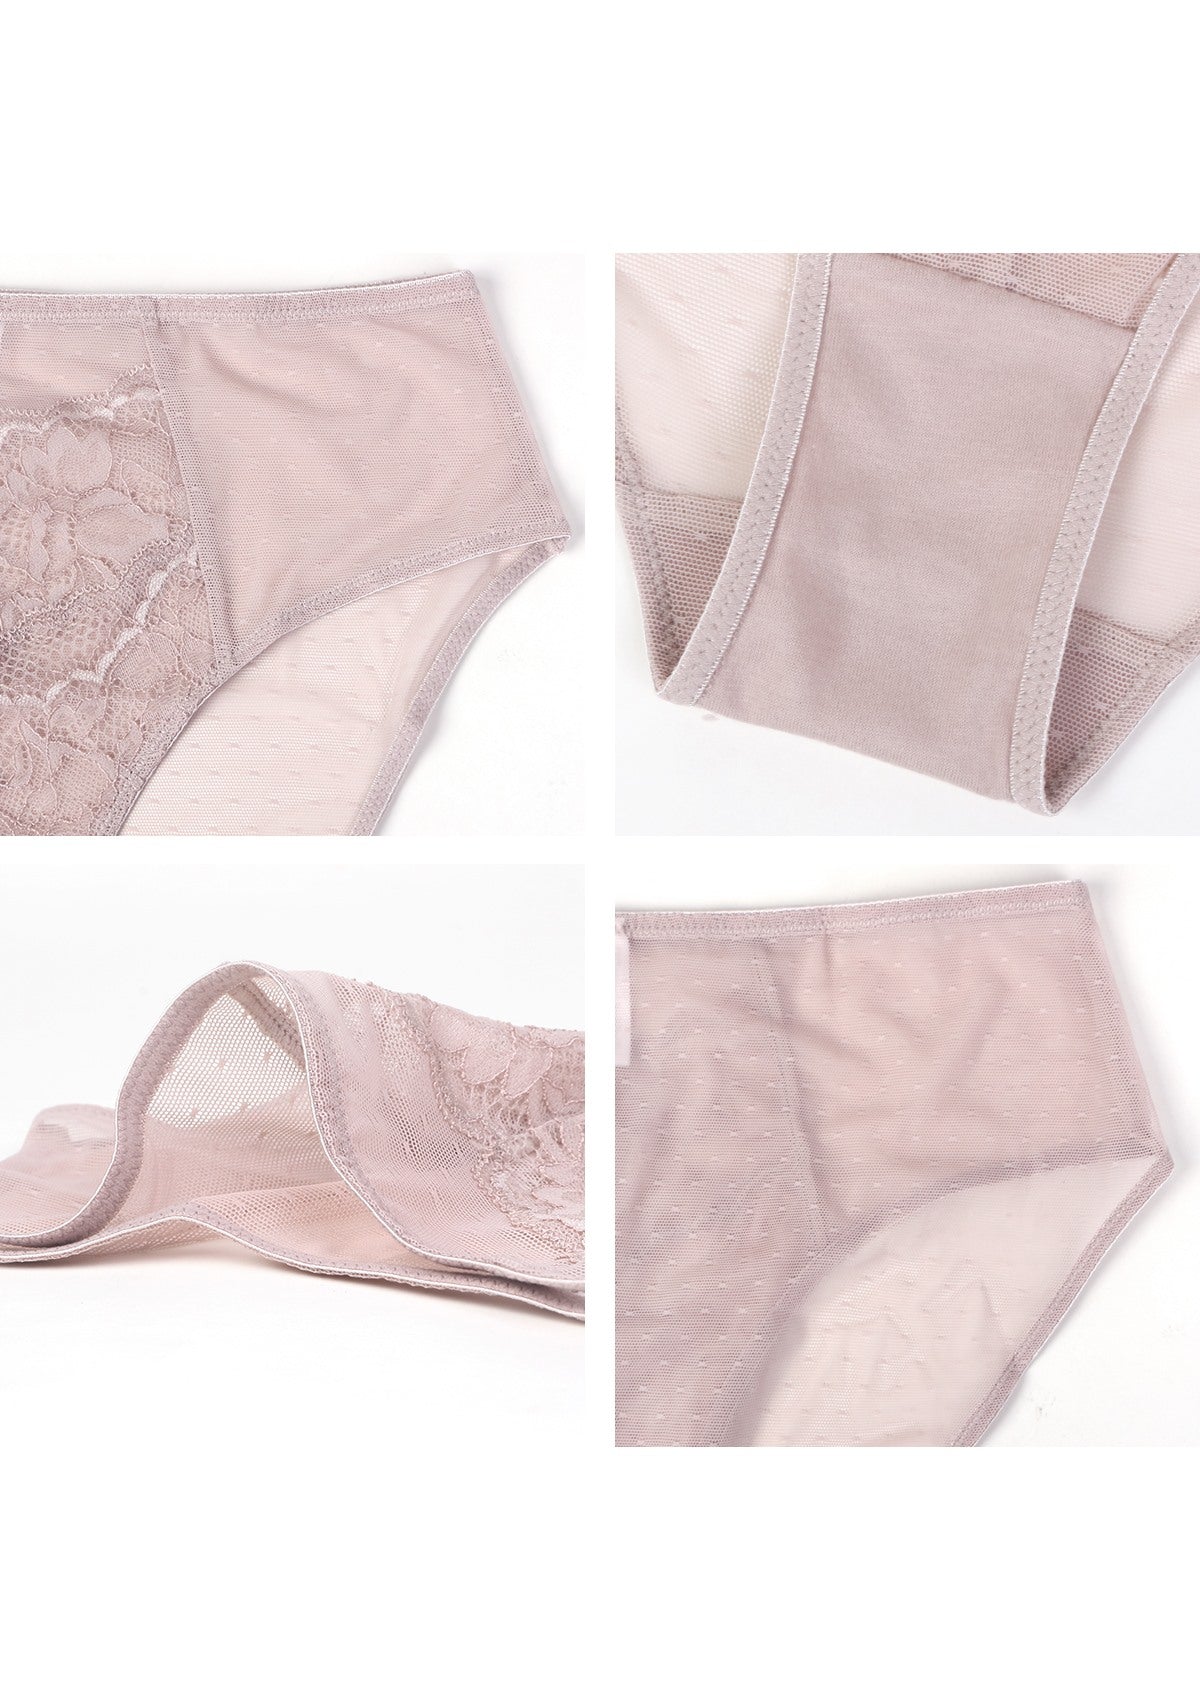 HSIA Enchante High-Rise Floral Lacy Panty-Comfort In Style - XL / Dark Pink